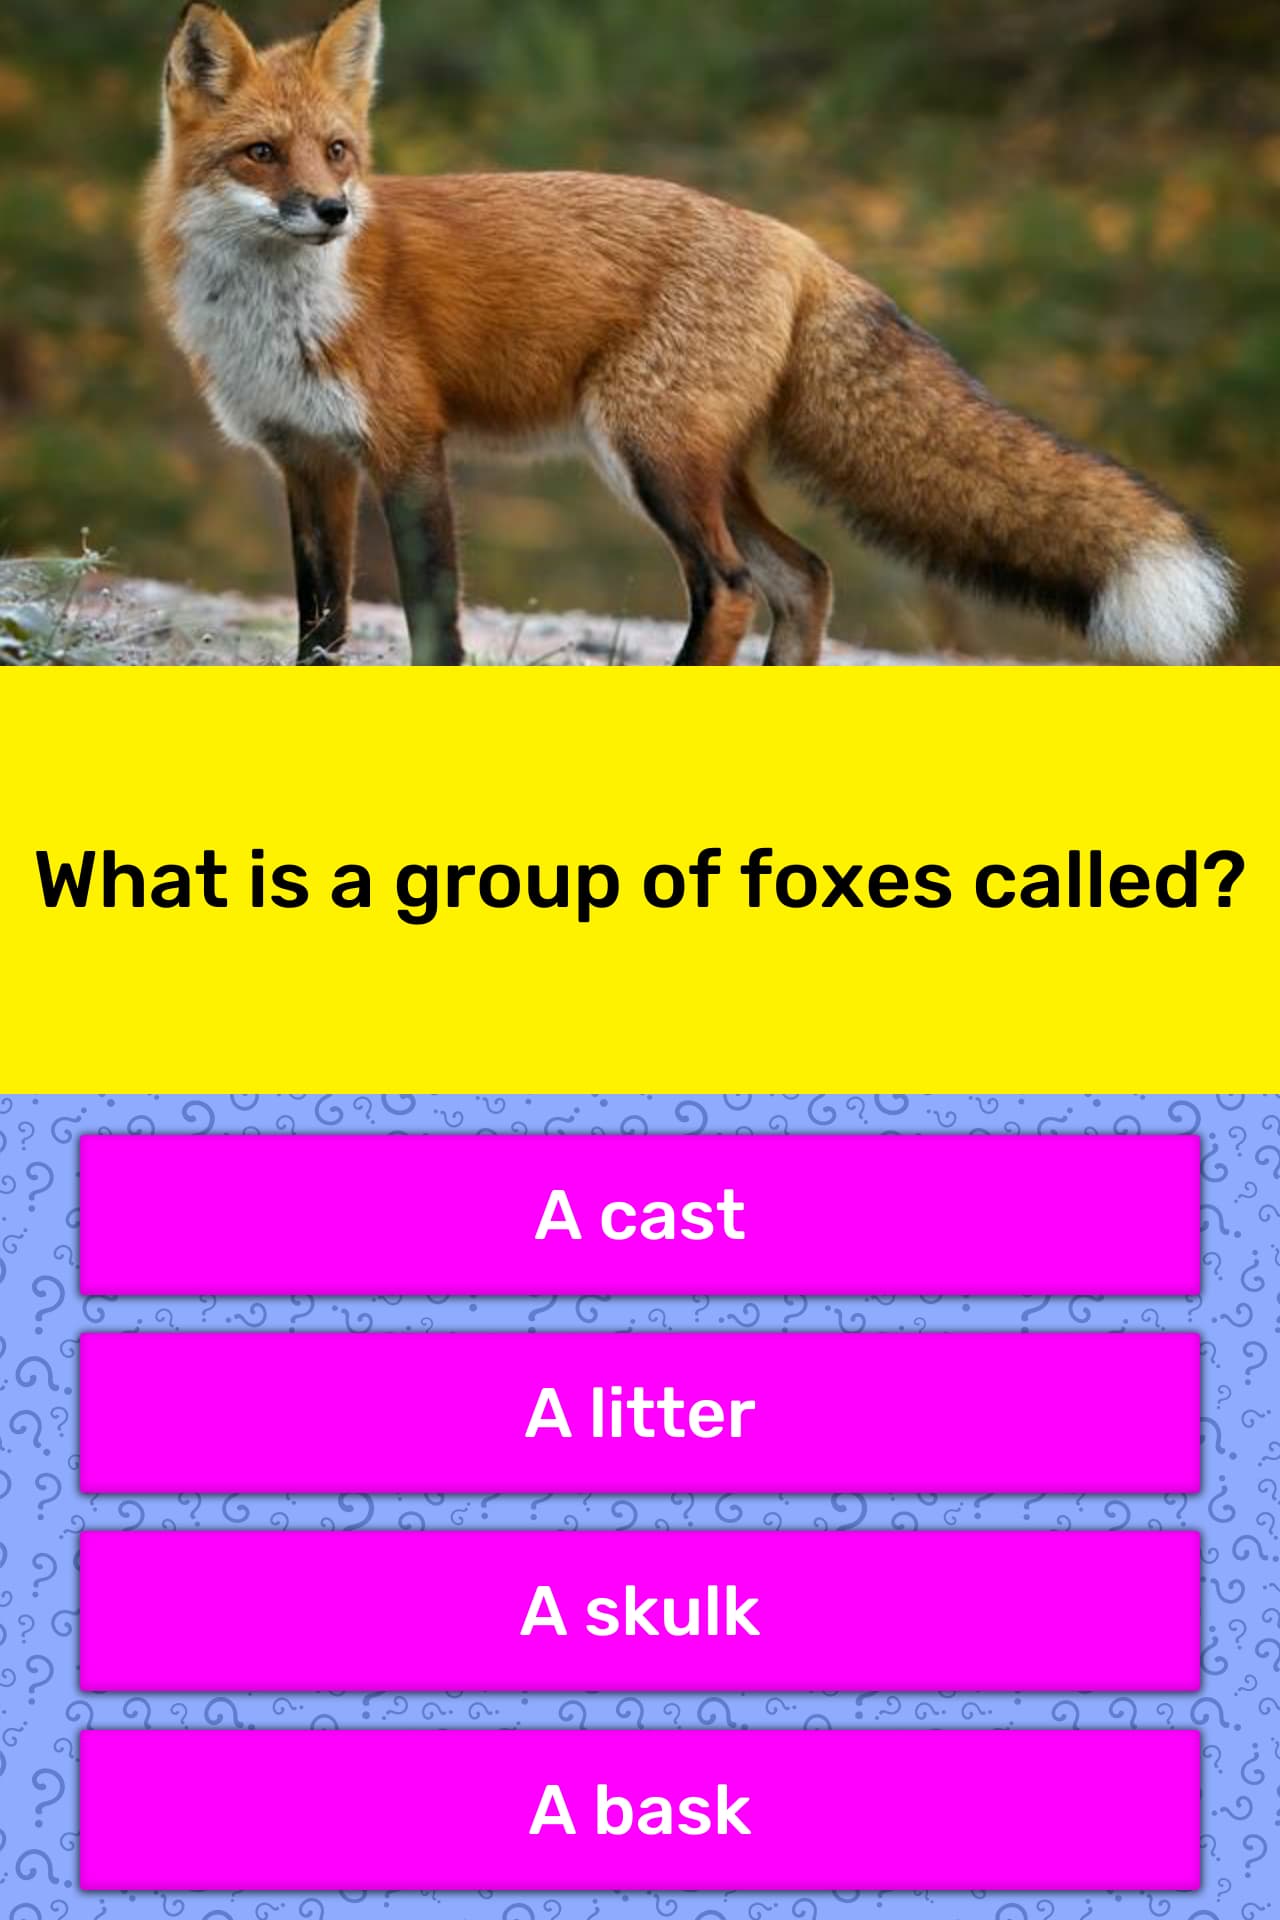 What is a lot of foxes called?